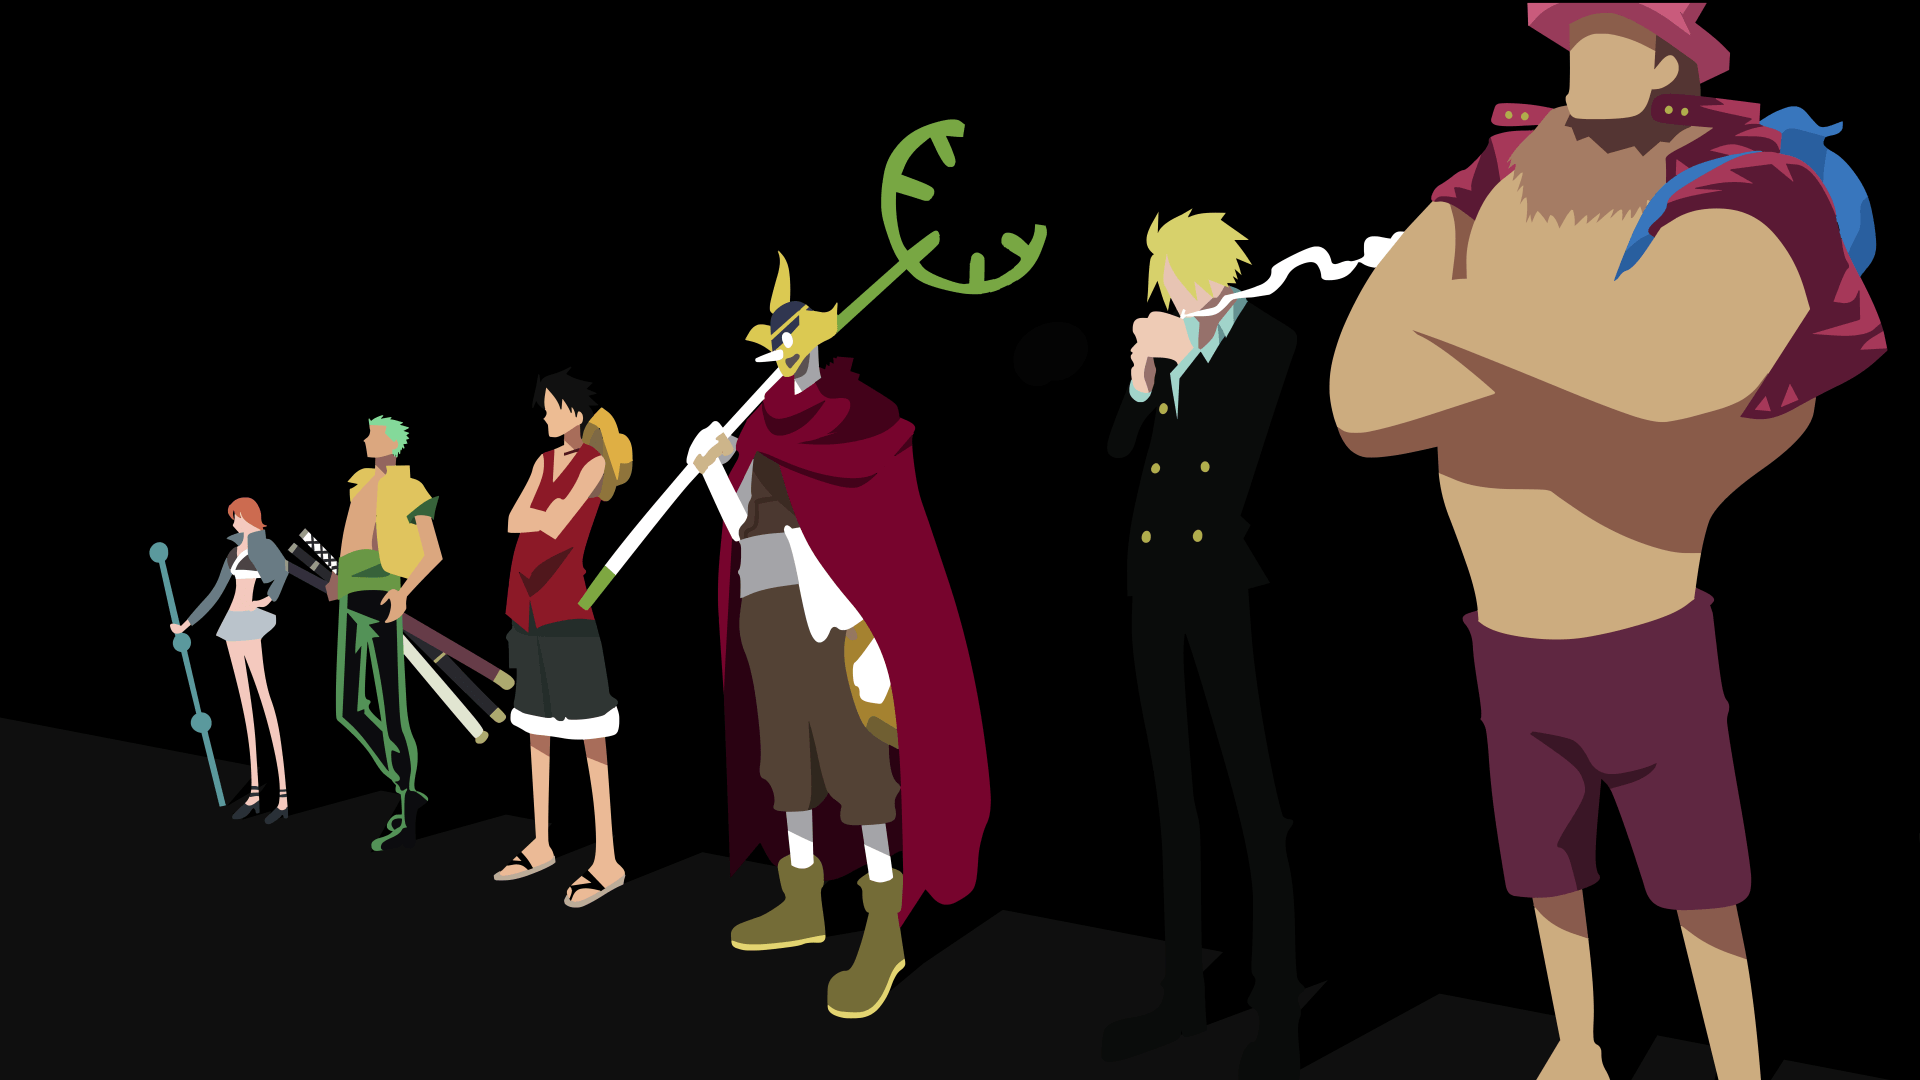 Minimalistic Wallpaper 4k Pc One Piece - IMAGESEE